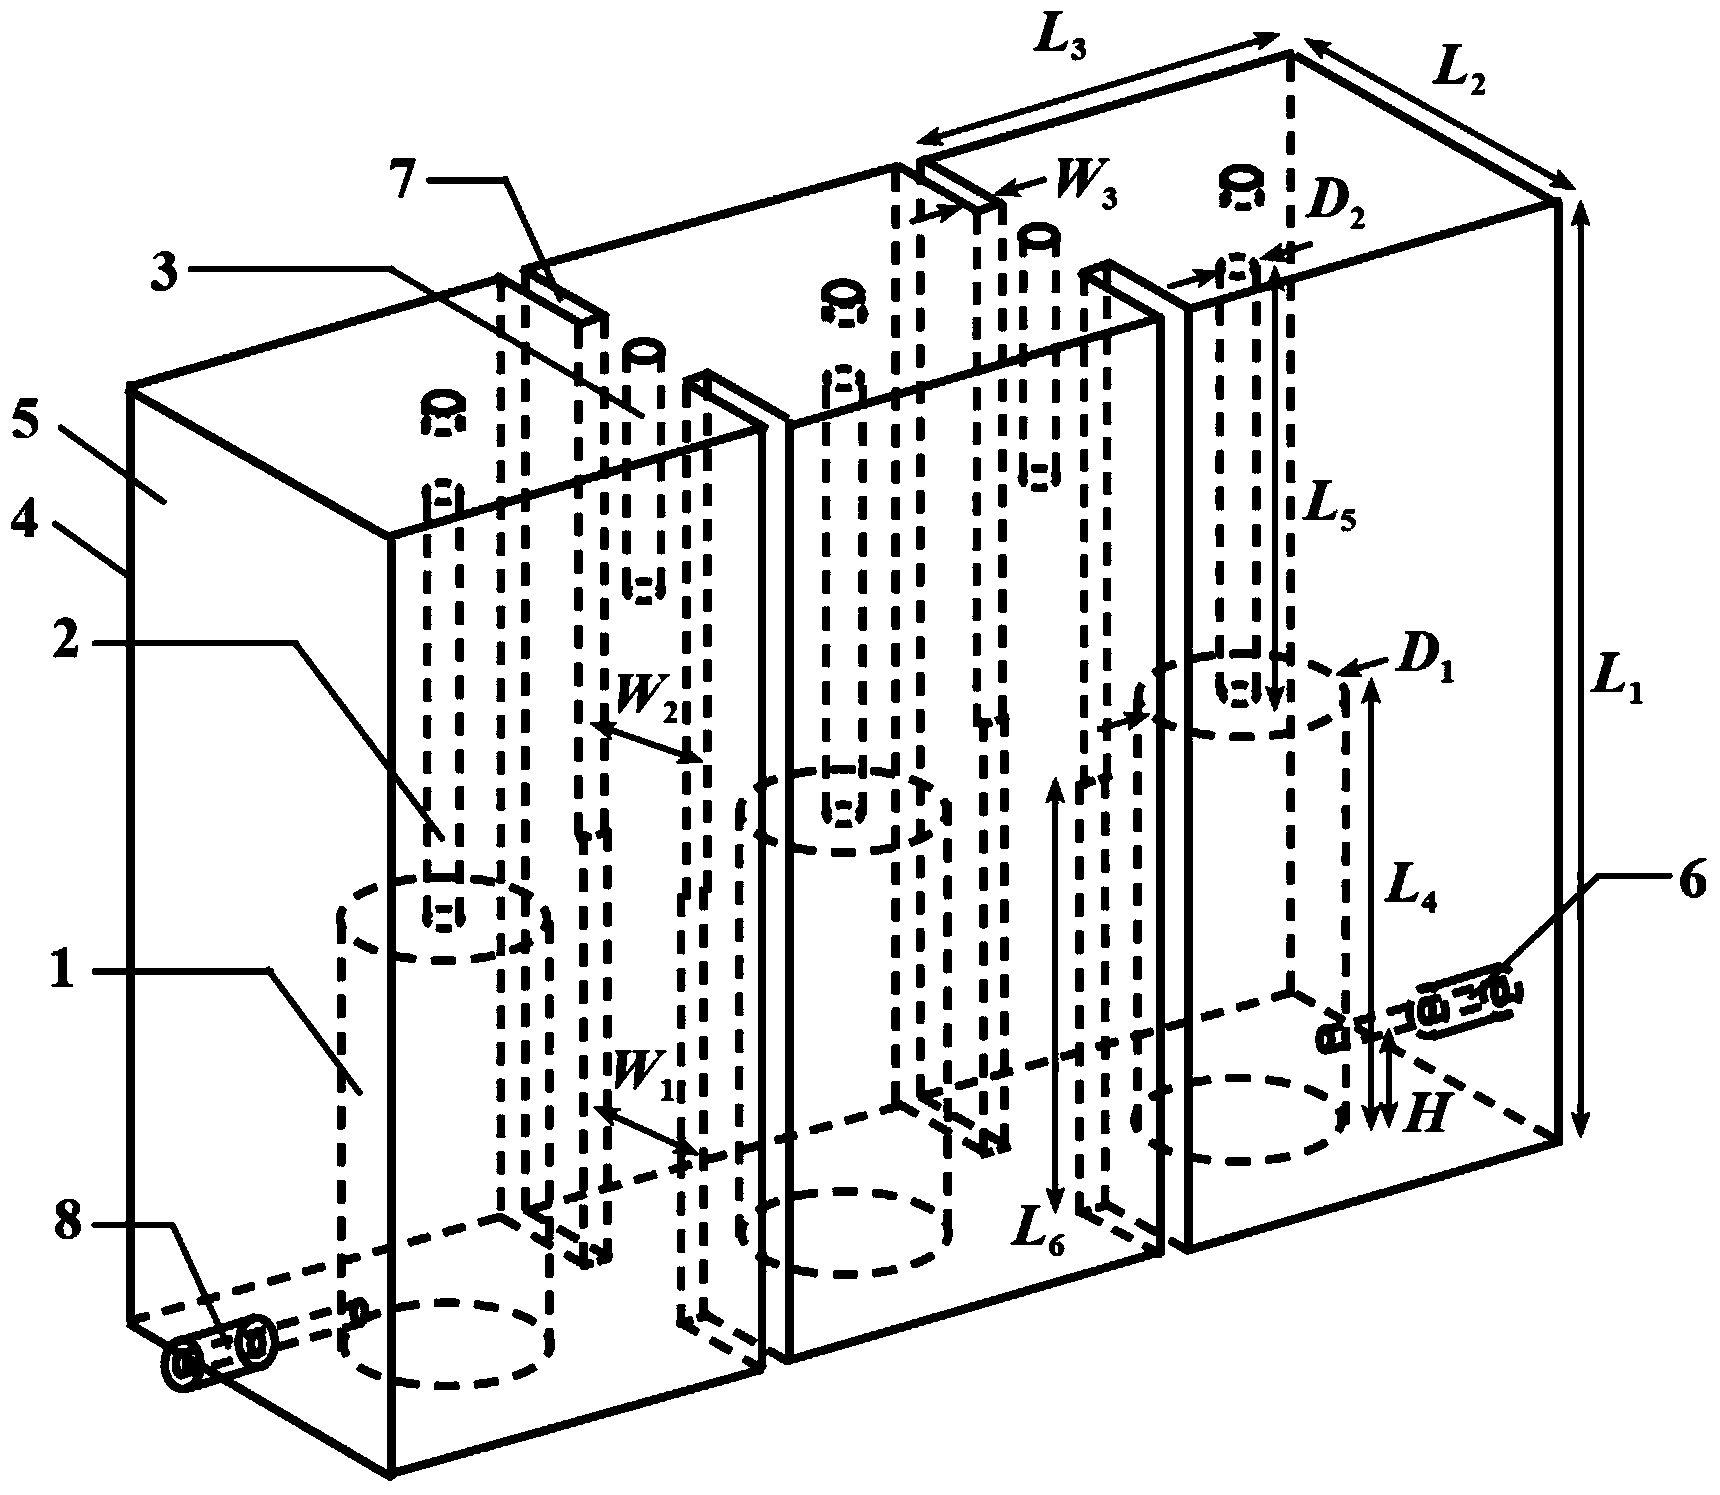 Coaxial cavity dual-band filter based on stepped impedance structure